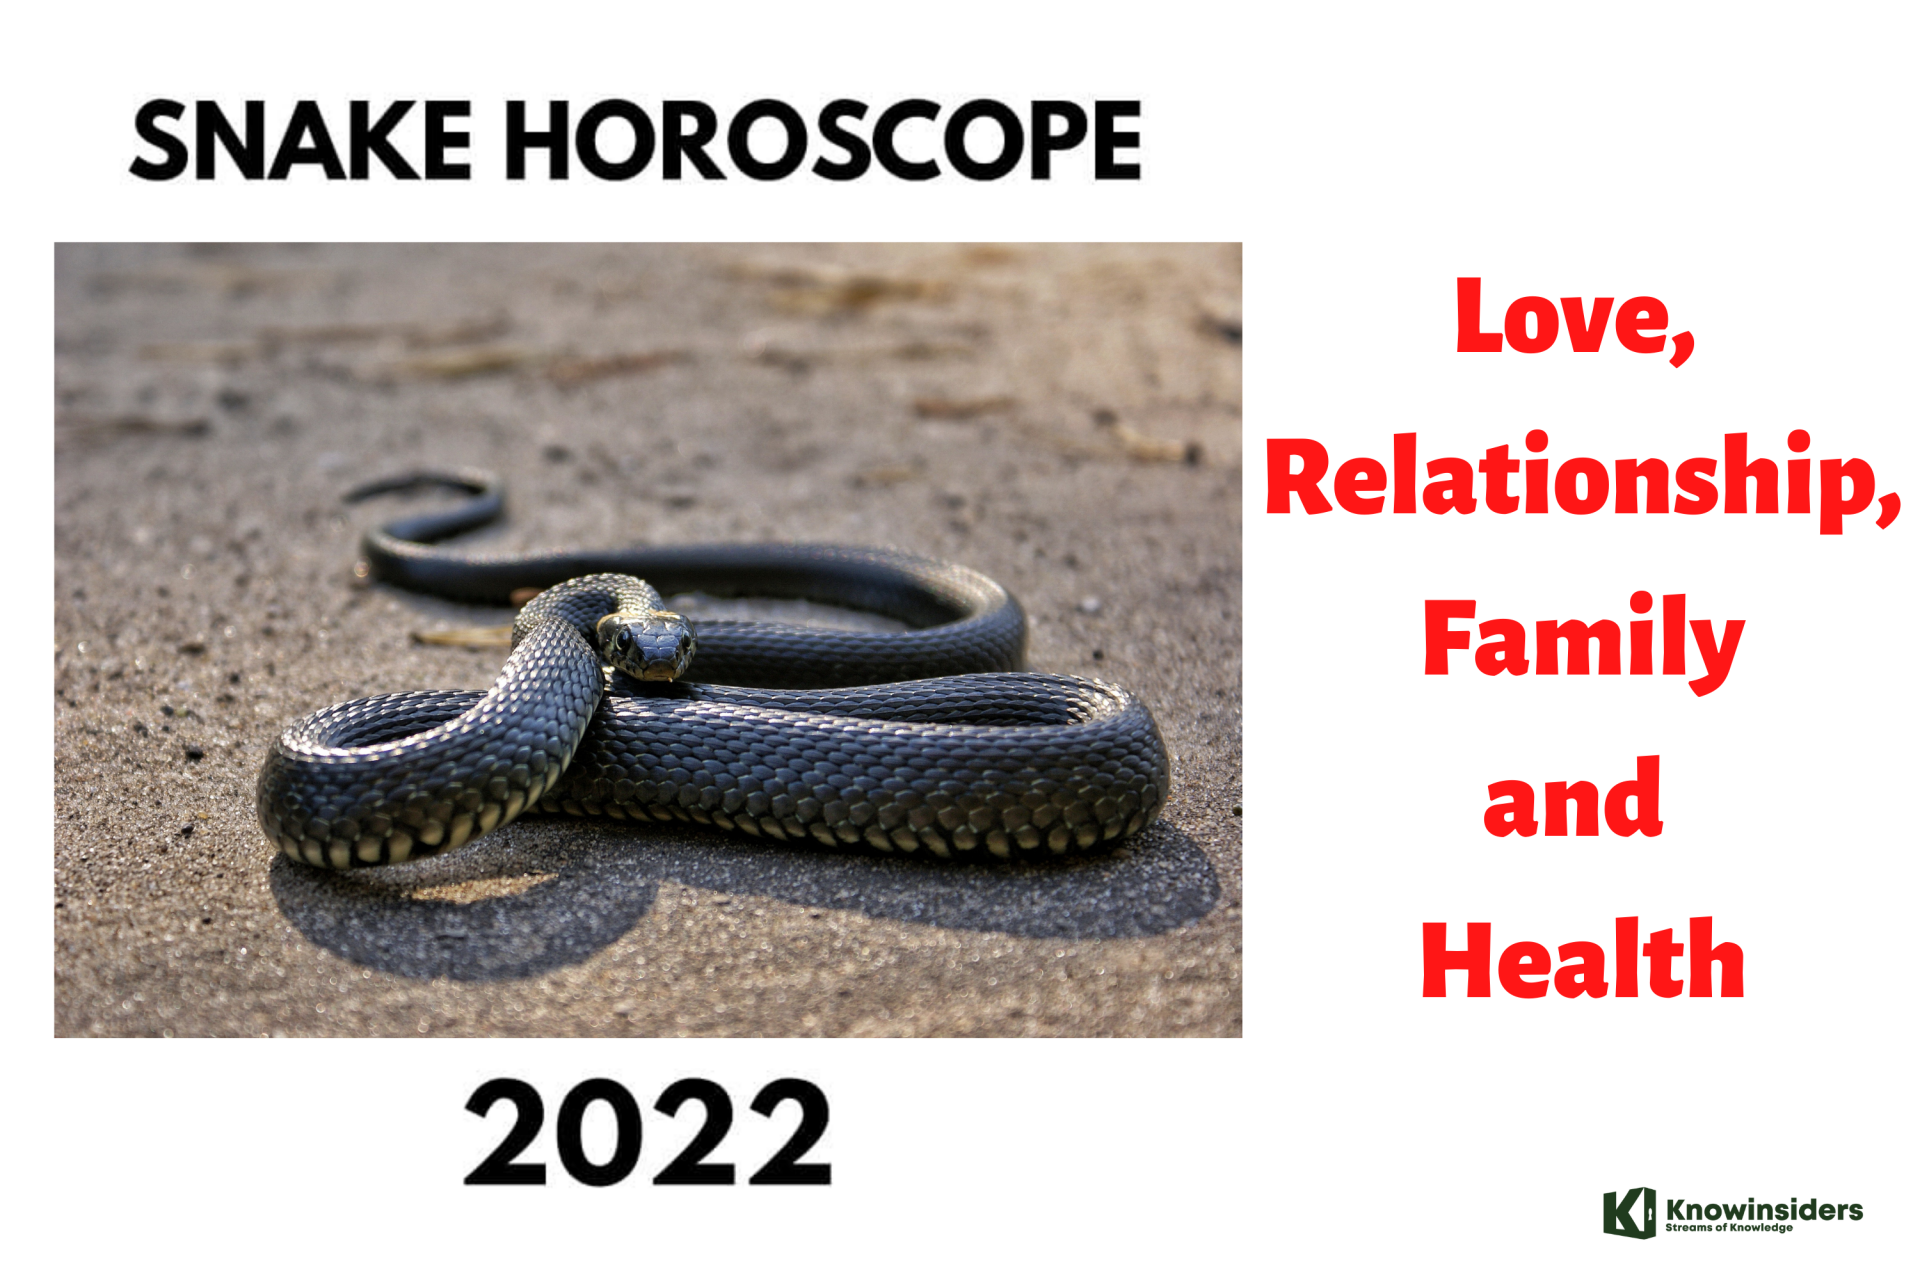 SNAKE Yearly Horoscope 2022 – Feng Shui Predictions for Love, Relationship, Family and Marriage